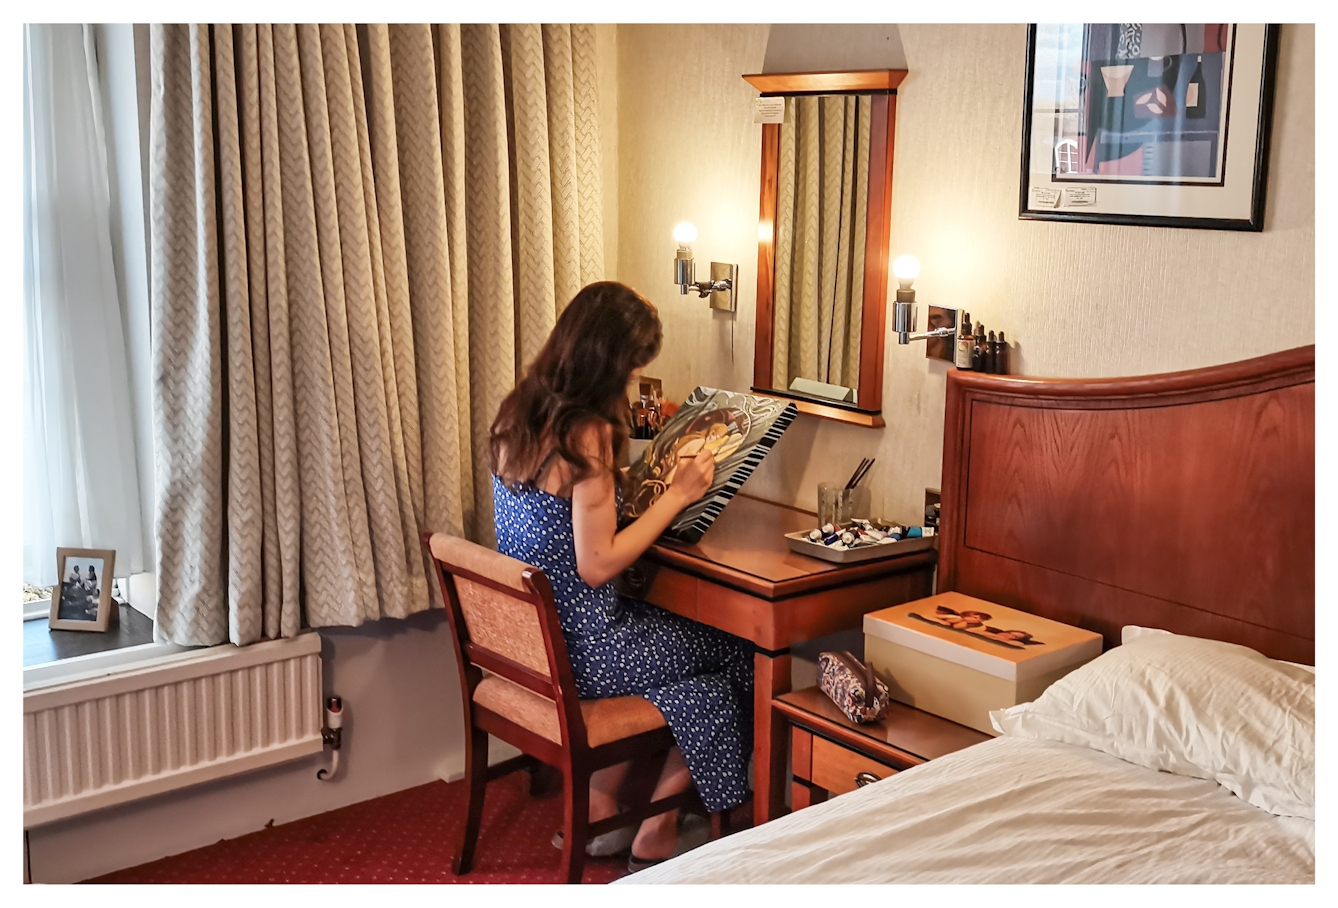 Photograph of the inside of a hotel room, with a corner of the bed, window, curtains and a wall mirror. Sat at the small desk is a woman in the process of painting onto a small stretched canvas.